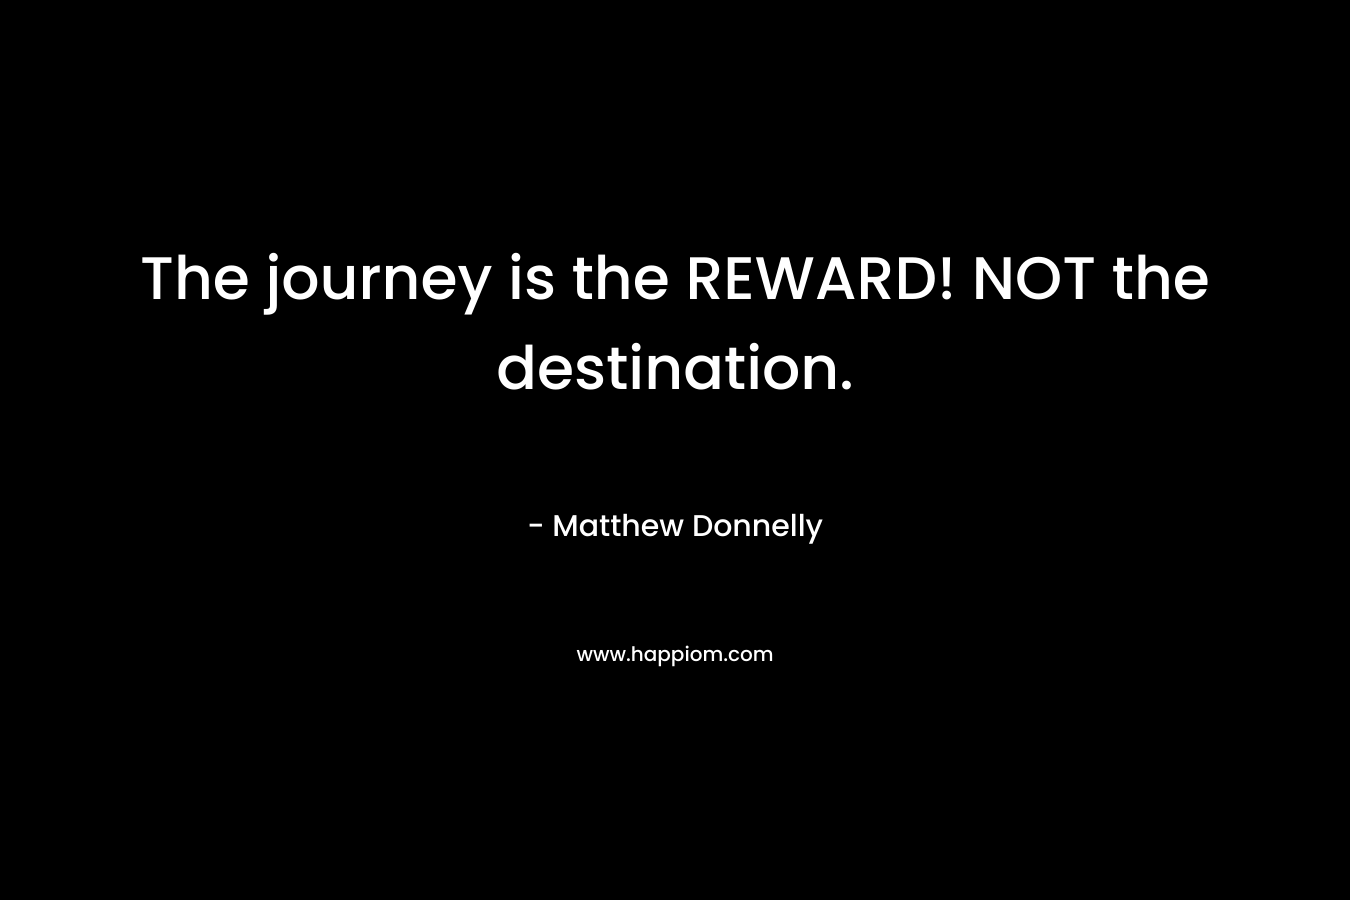 The journey is the REWARD! NOT the destination. – Matthew Donnelly